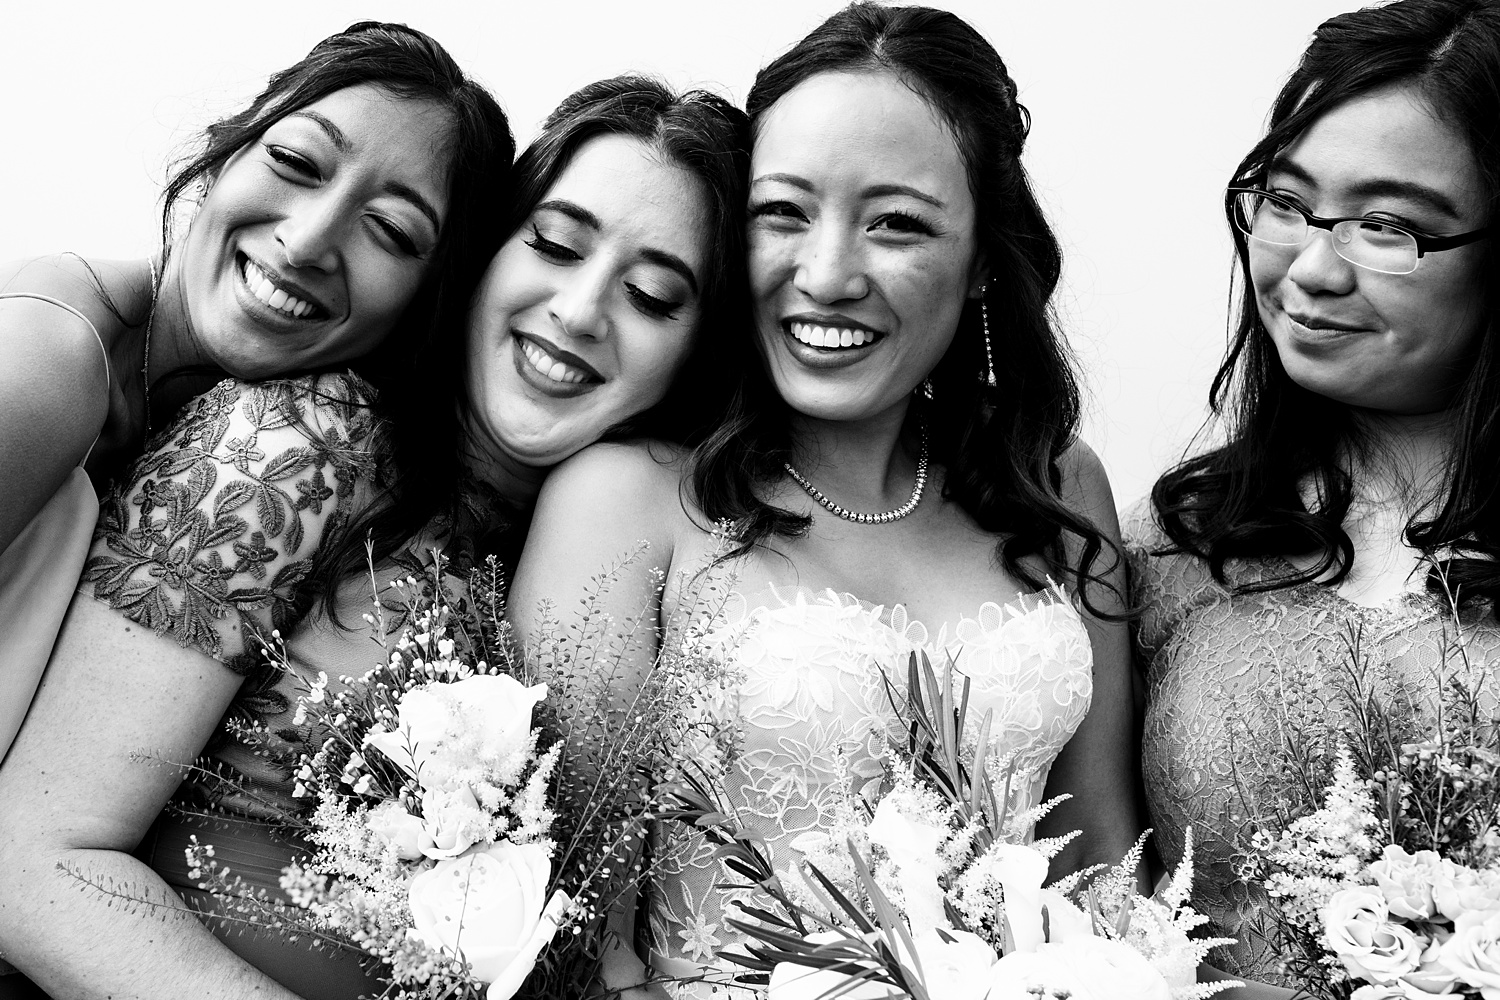 The bride with some of her closest friends cuddle close on the wedding day